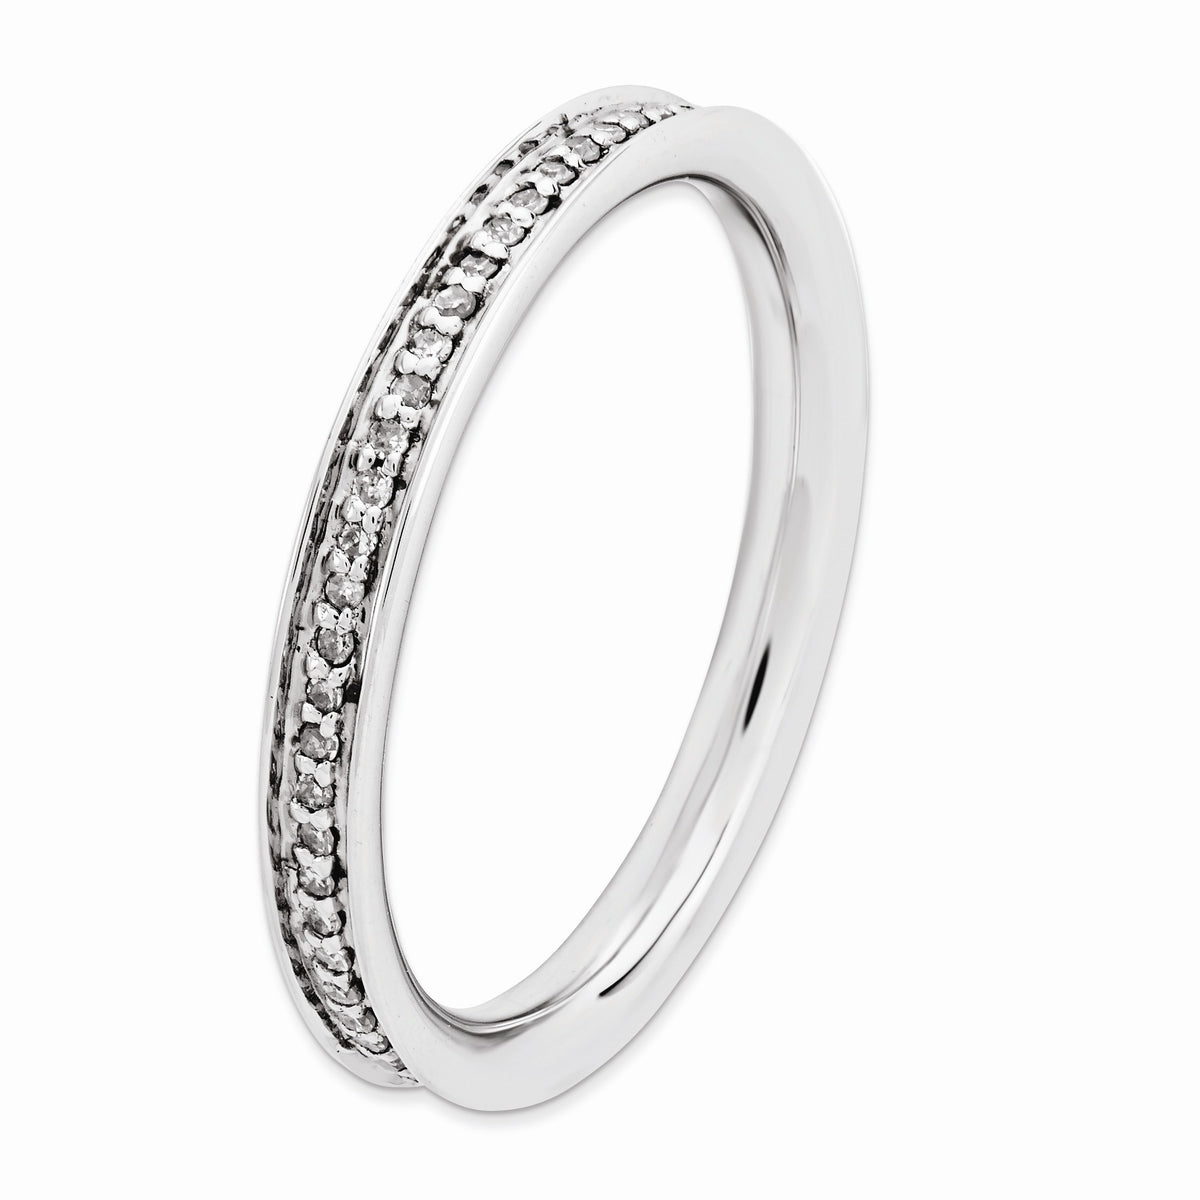 Alternate view of the 2.25mm Stackable Sterling Silver 1/5 Cttw HI/I3 Diamond Band by The Black Bow Jewelry Co.